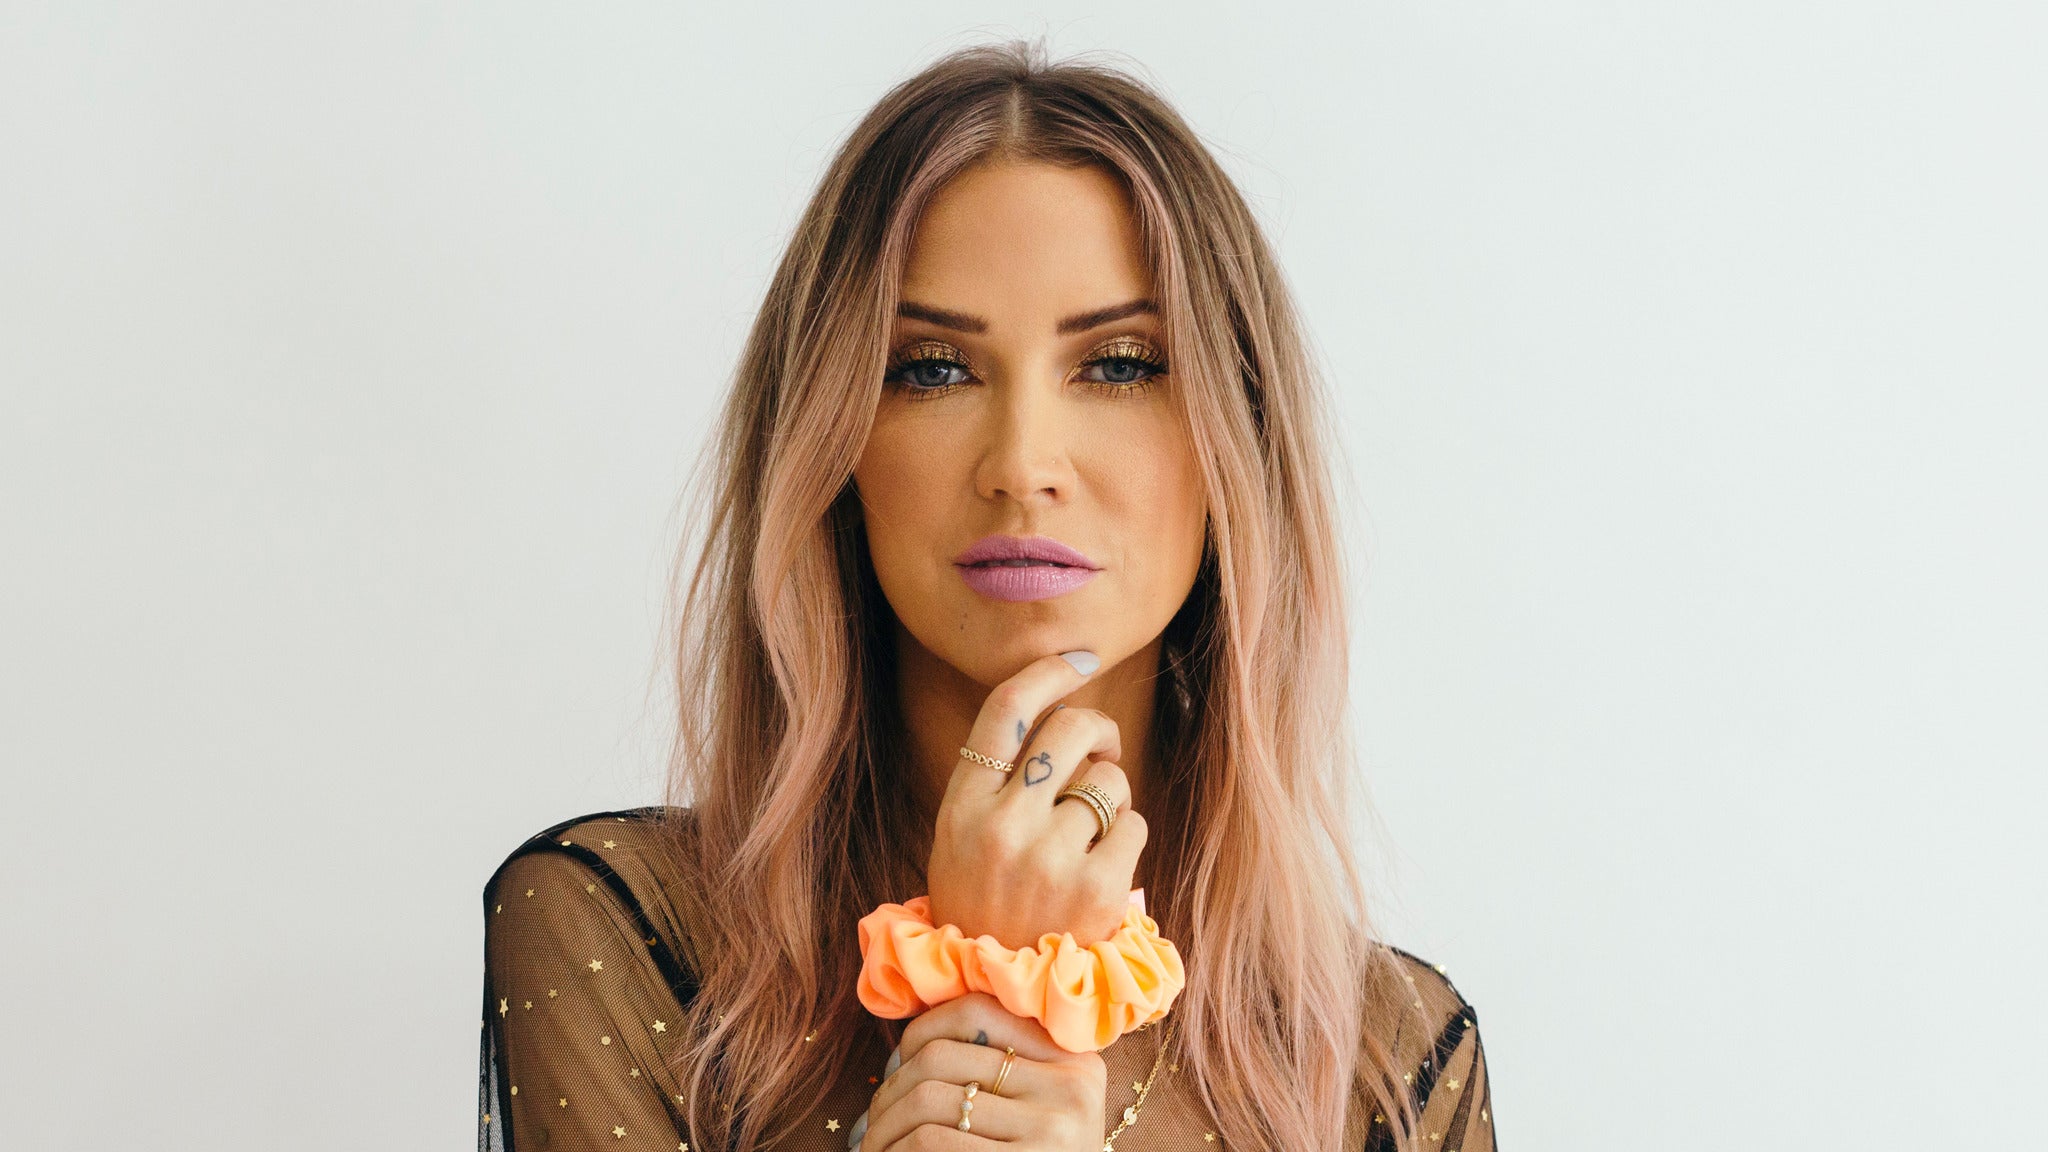 Kaitlyn Bristowe: KB Fall Crawl Tour in Vancouver promo photo for Facebook presale offer code